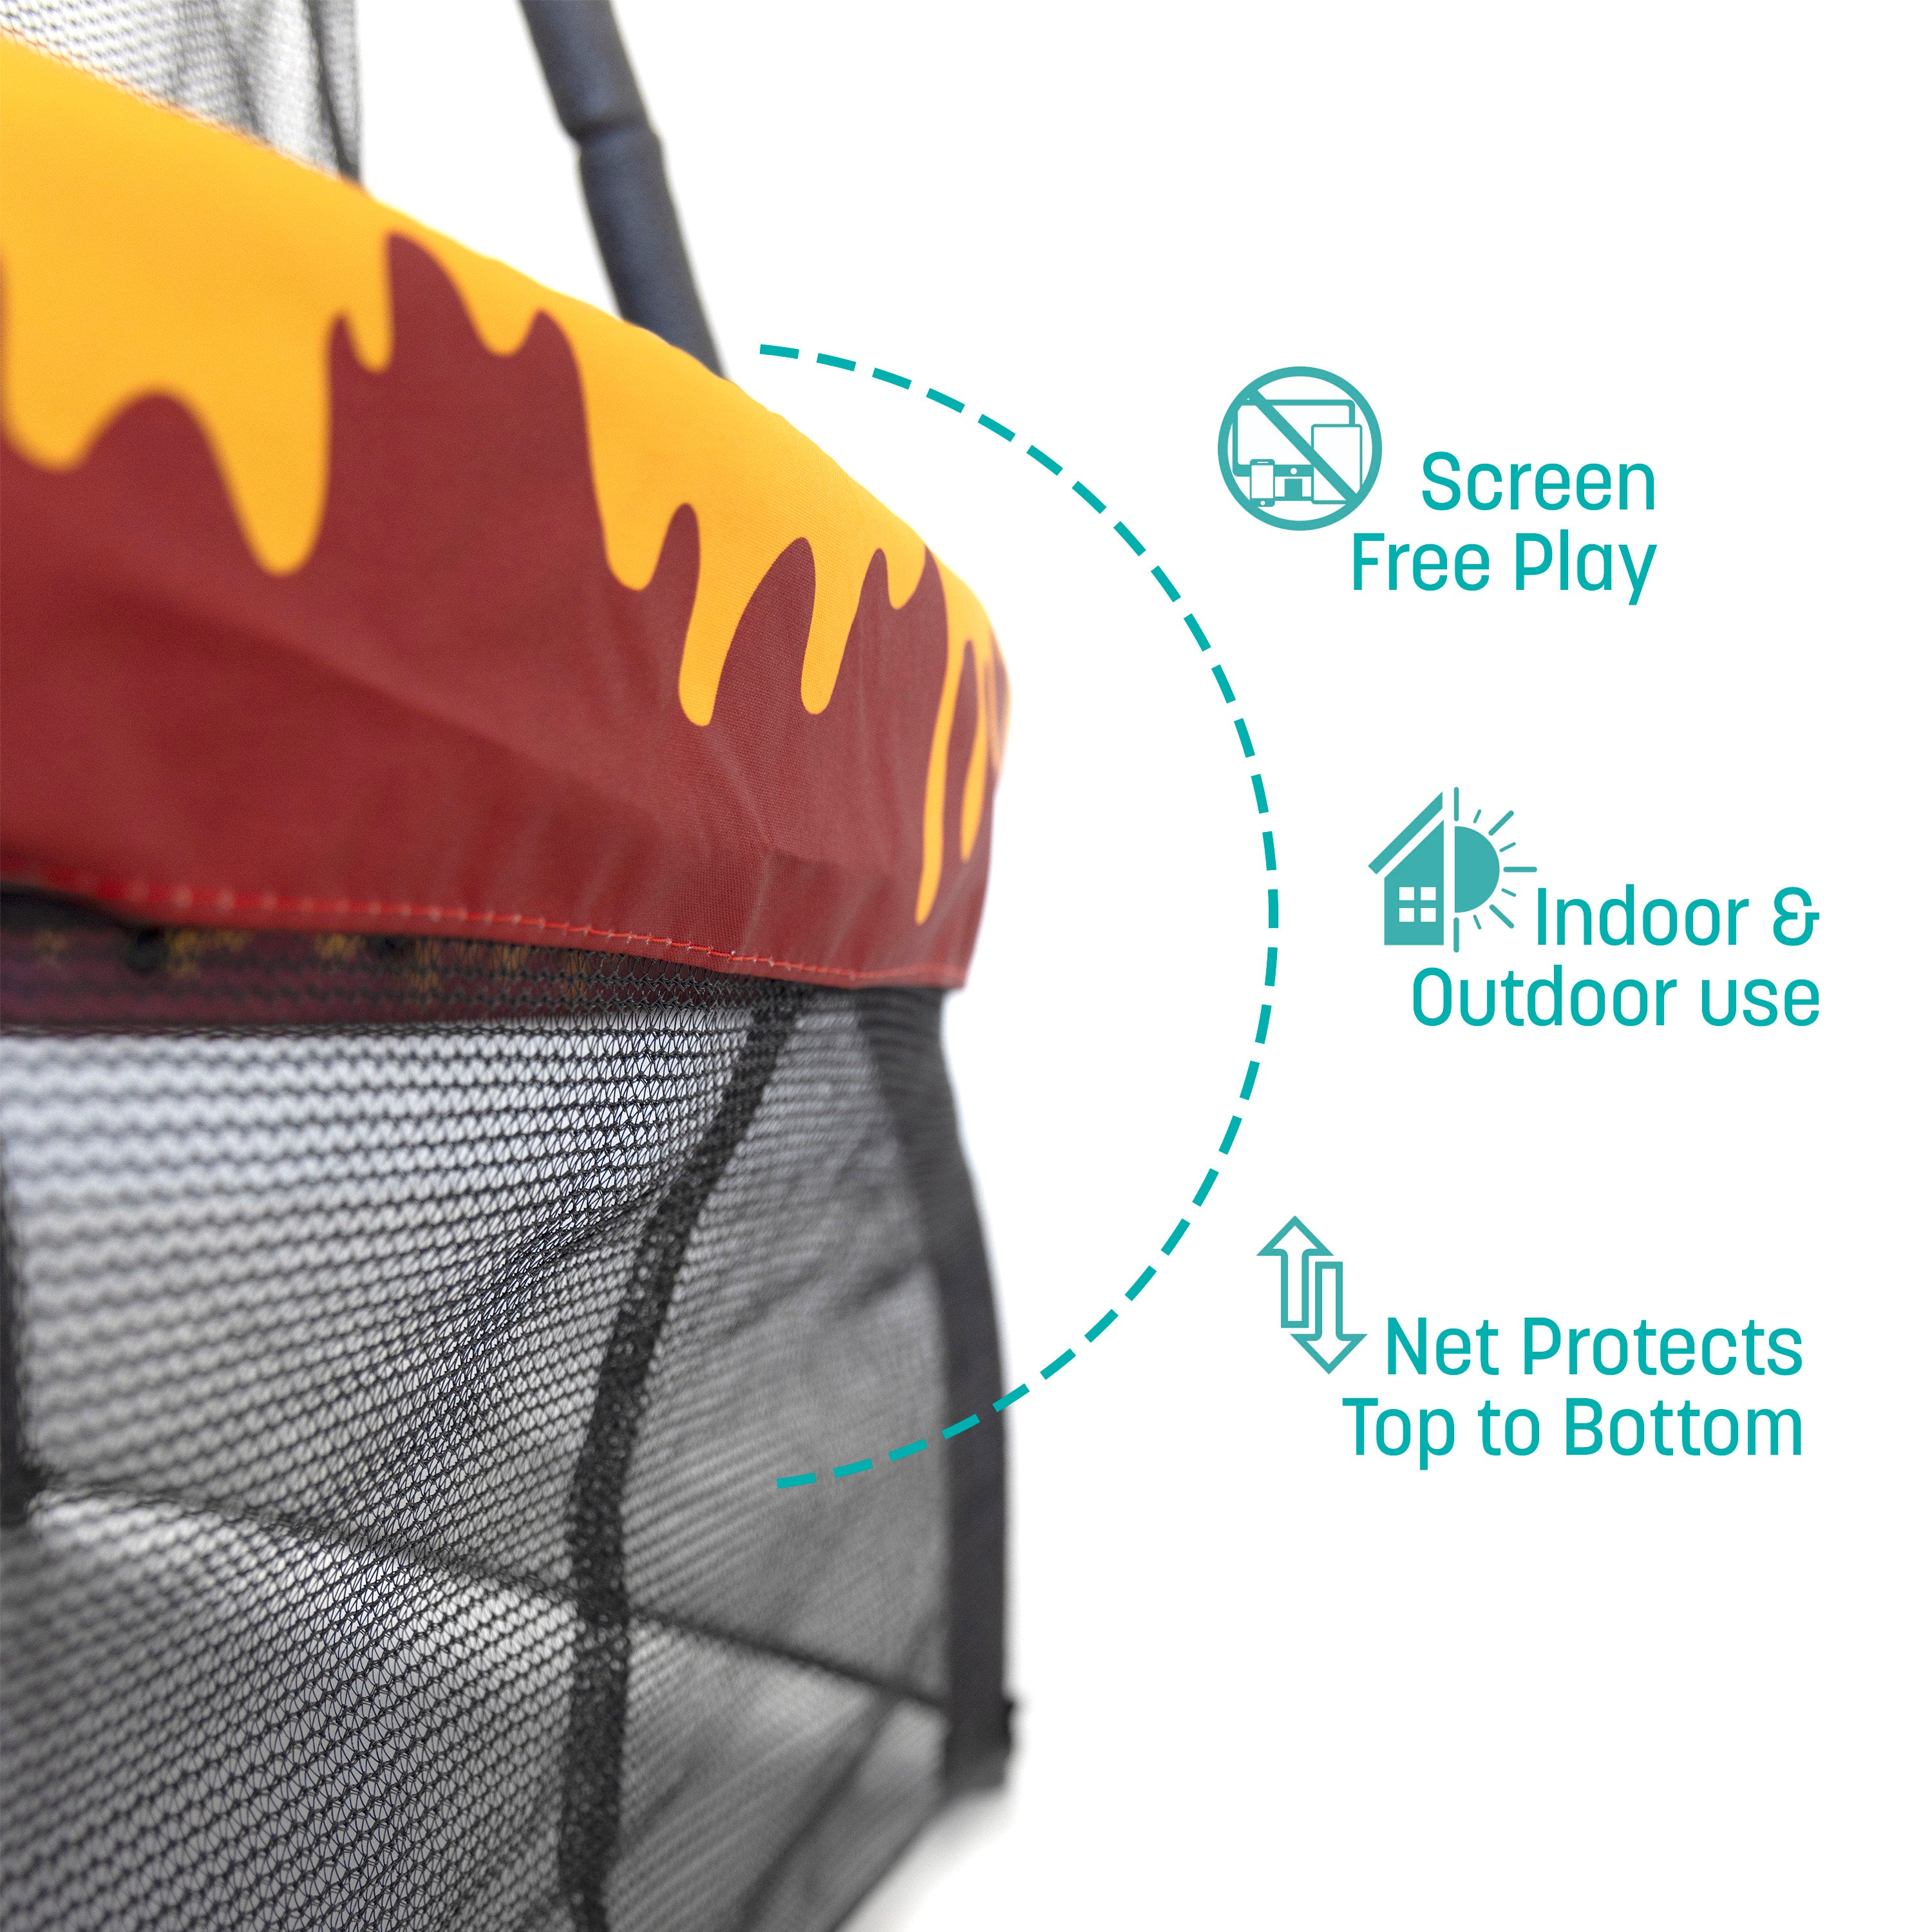 The lower enclosure net hangs down from the bottom of the frame. Three teal callout features state, “Screen Free Play, Indoor & Outdoor Use, Net Protects Top to Bottom”. 